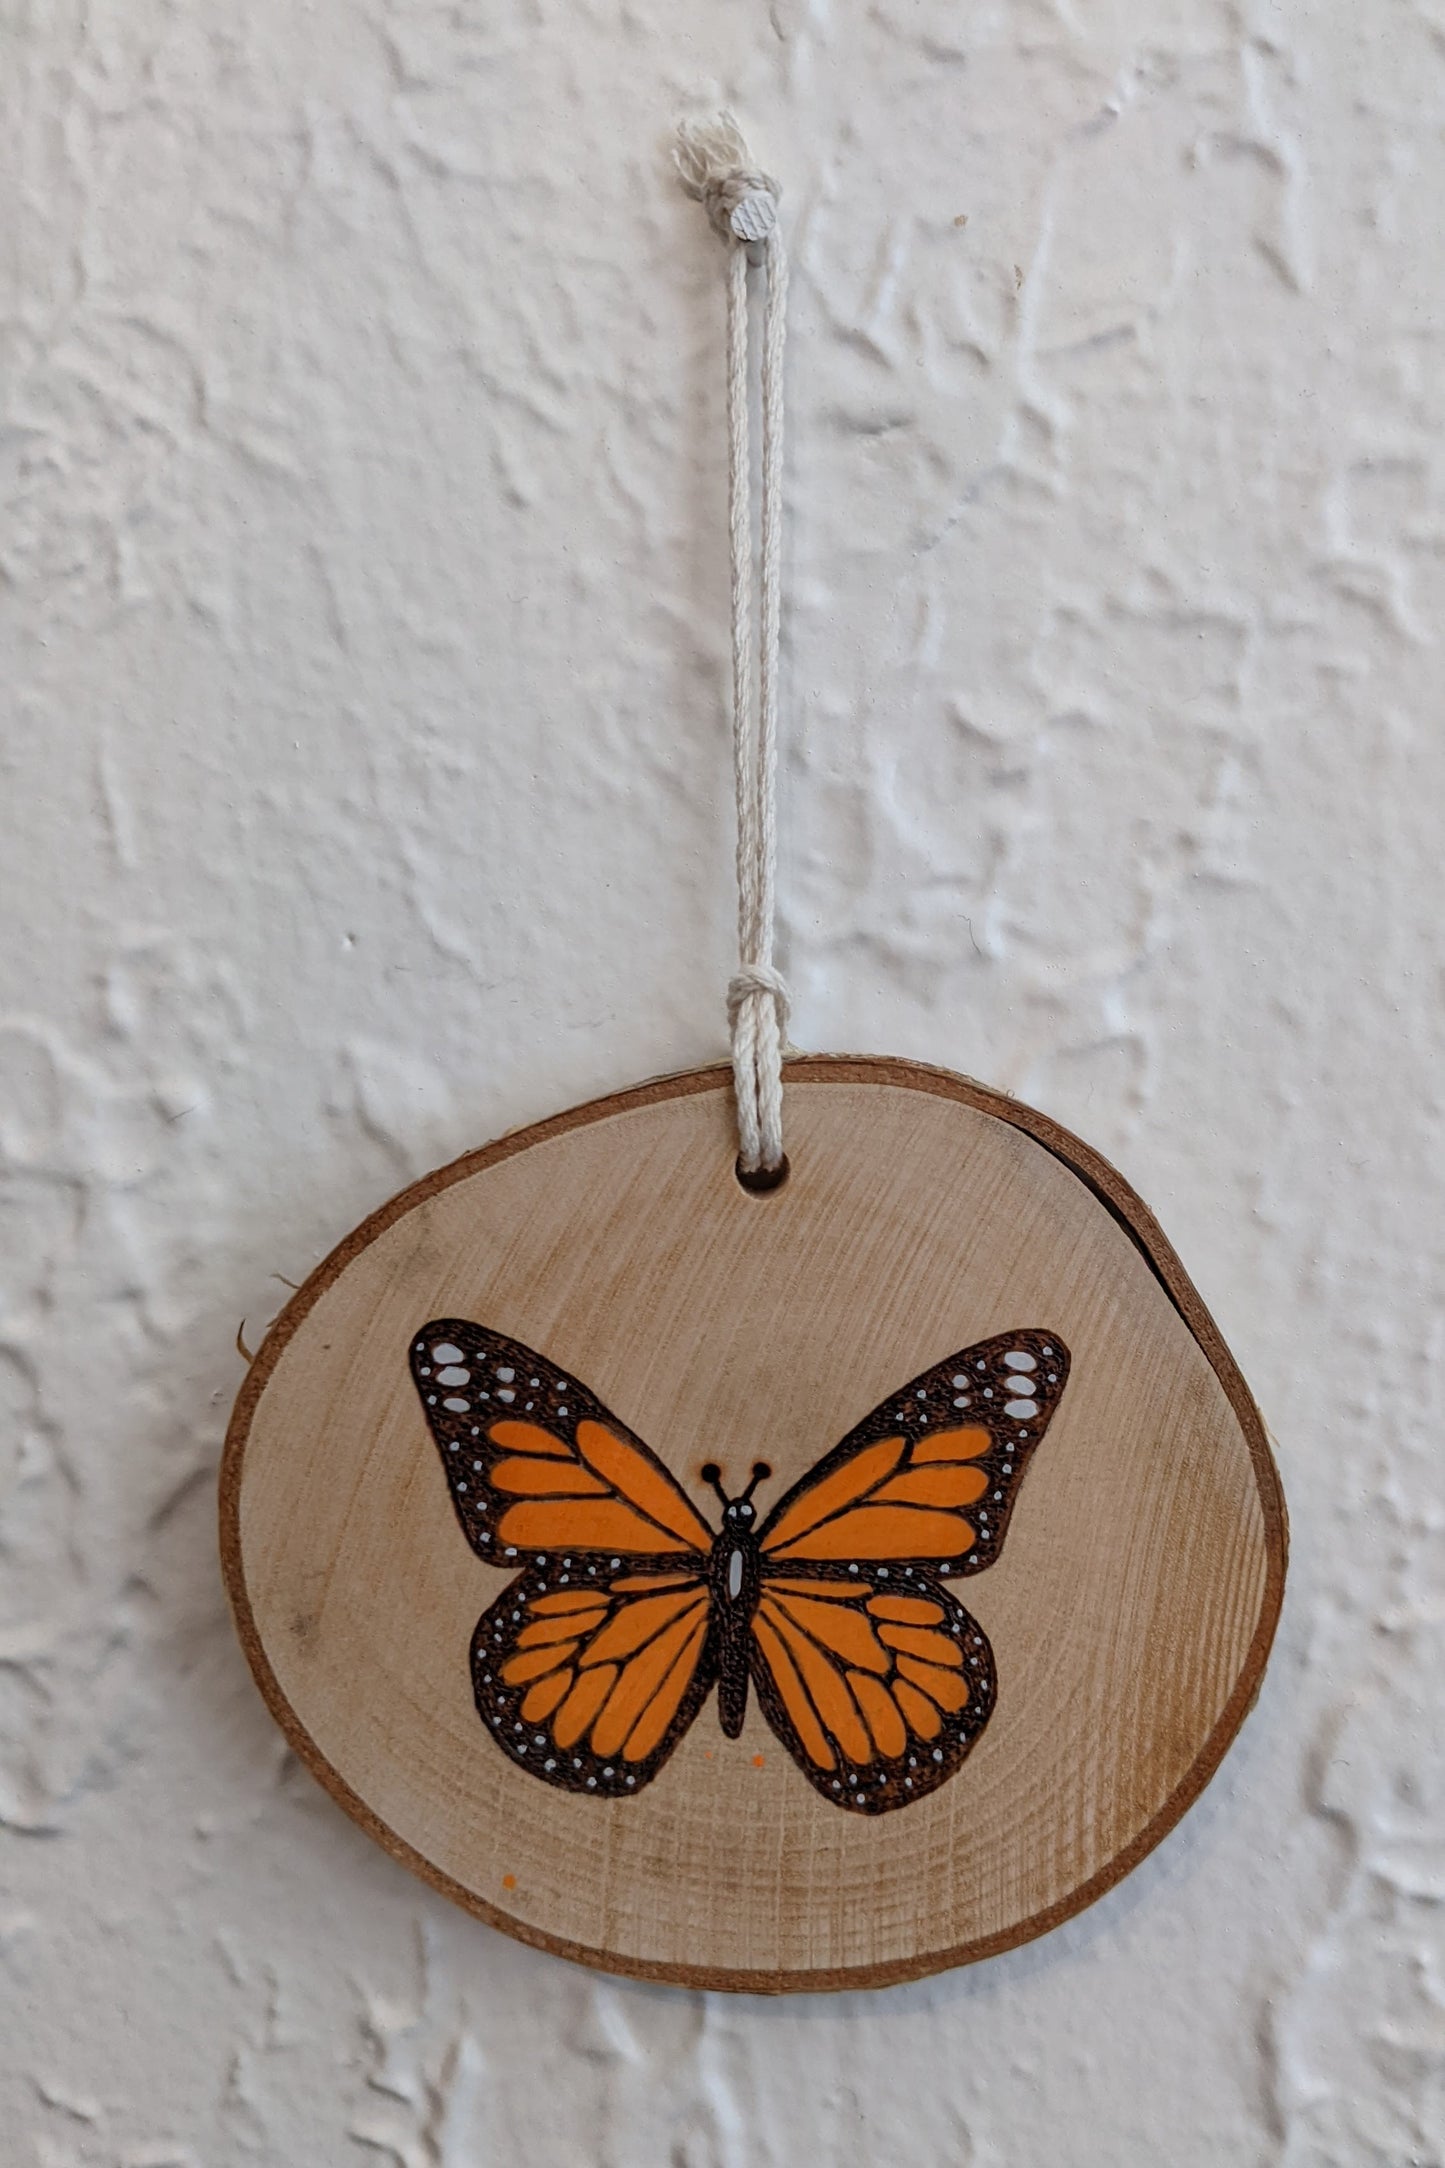 Wood burned Art by Wood Wanderlust Ornament with Monarch